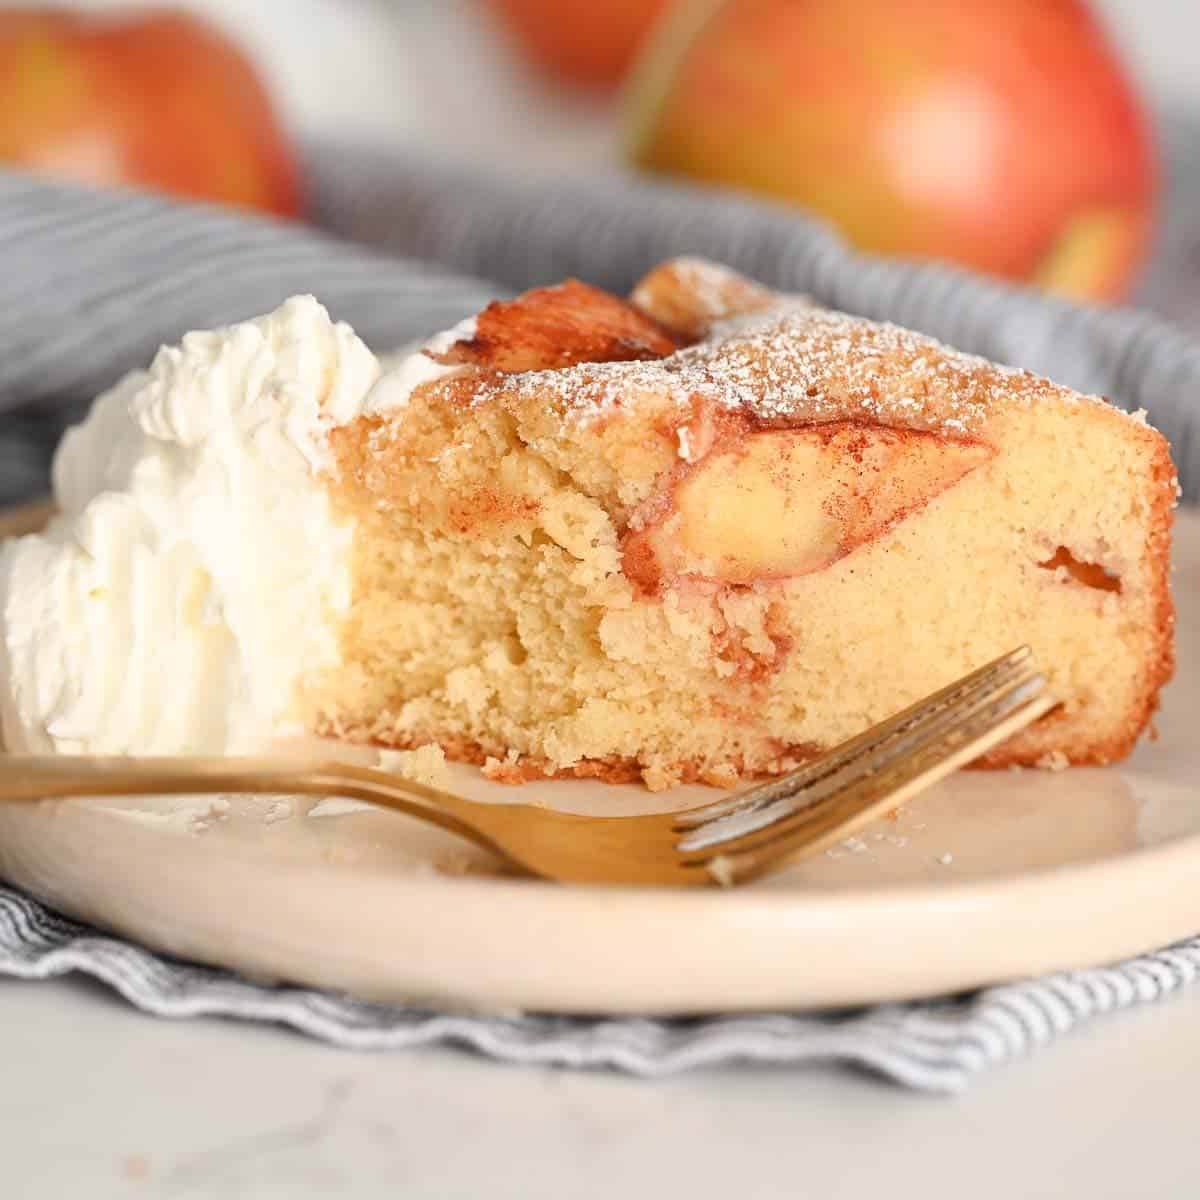 slice of apple cake with whipped cream